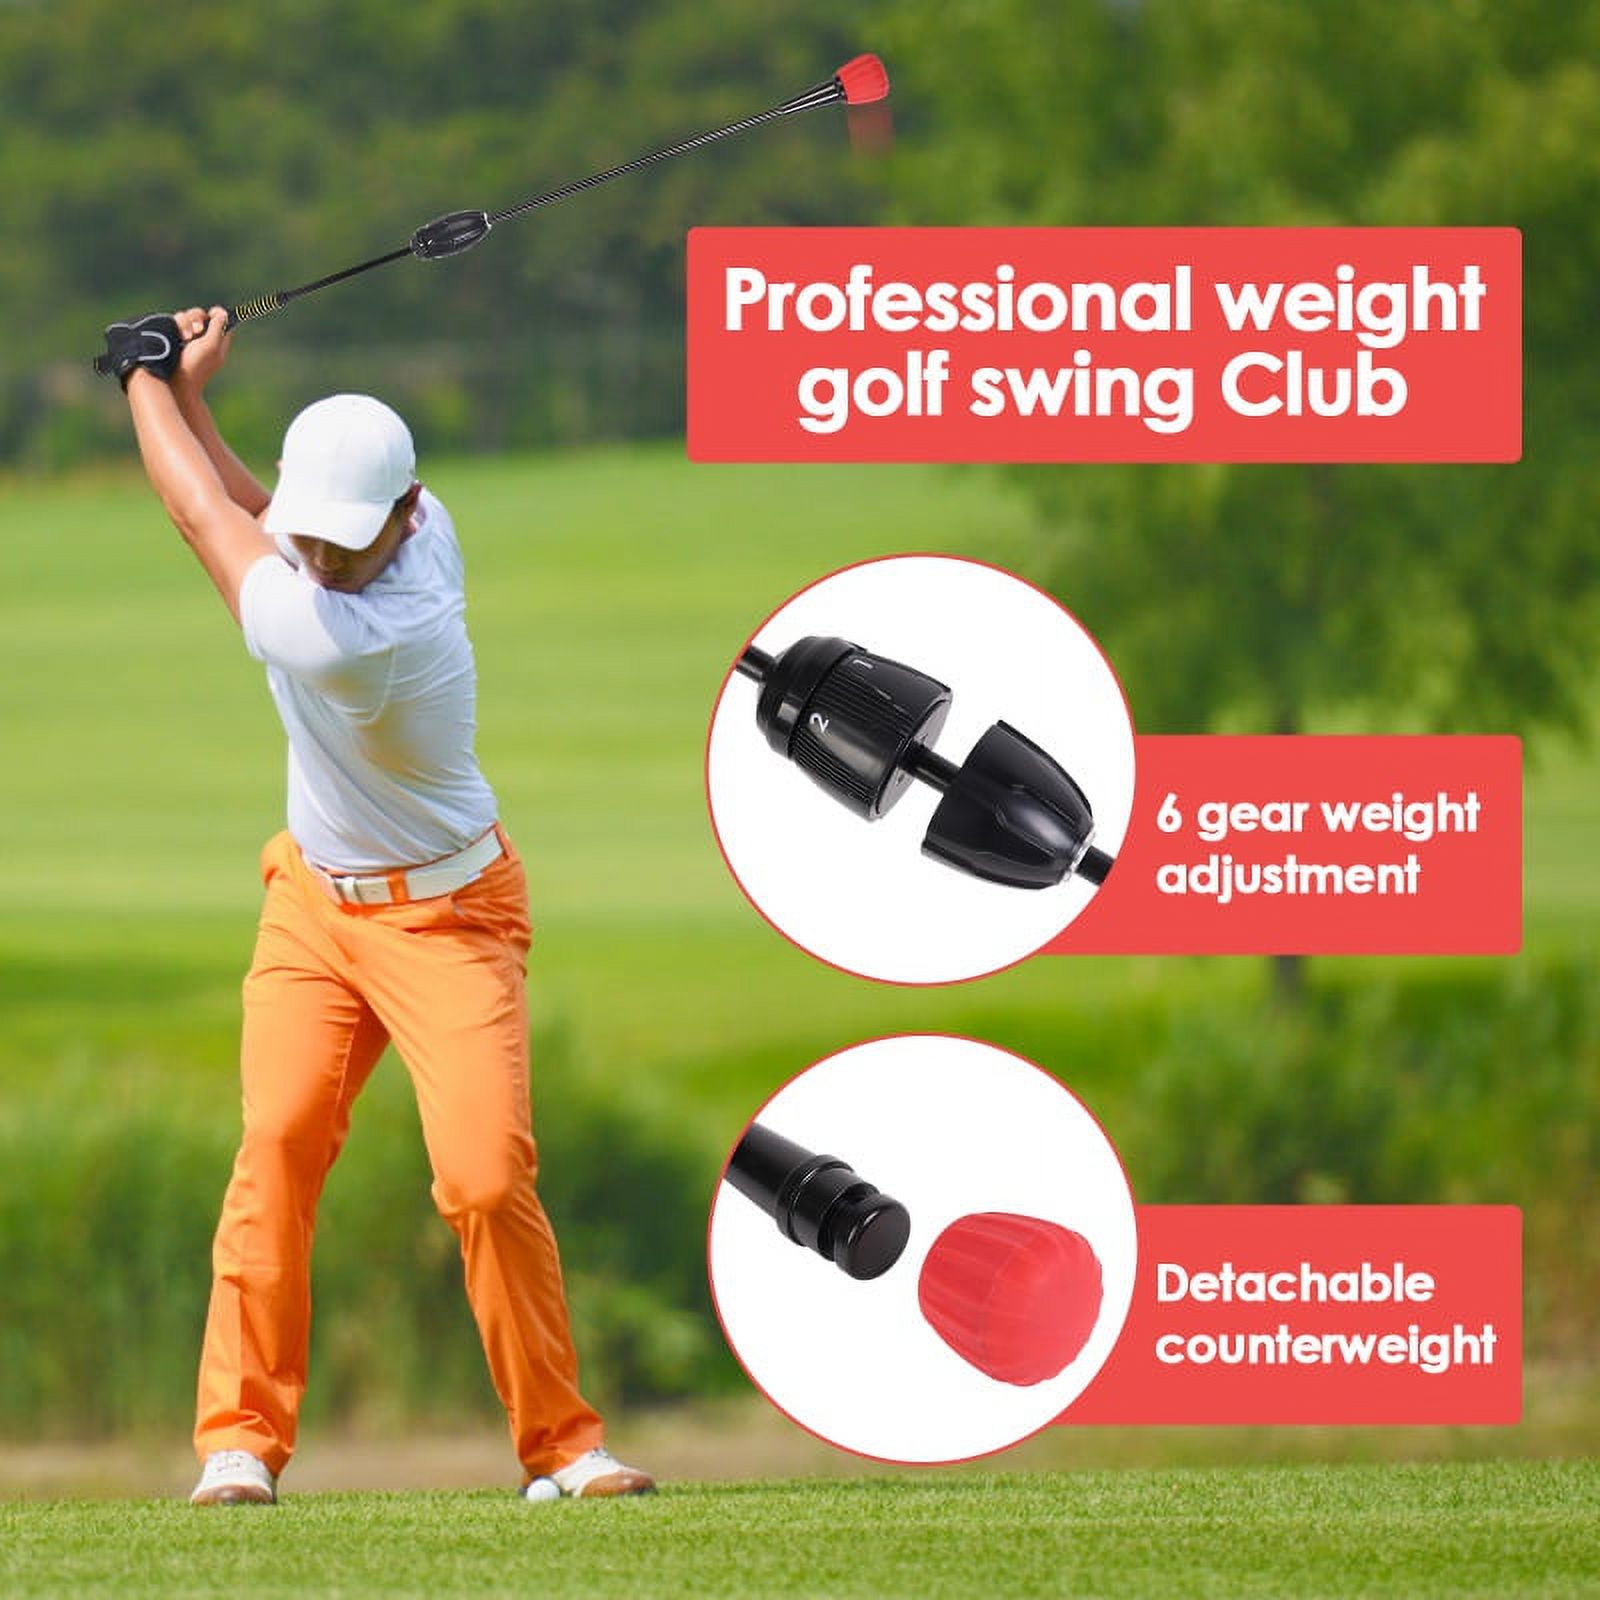 Power Stick Golf Distance Training Aid Increase Swing Speed and Develop Lag for More Power to Hit Every Club Further - image 5 of 12